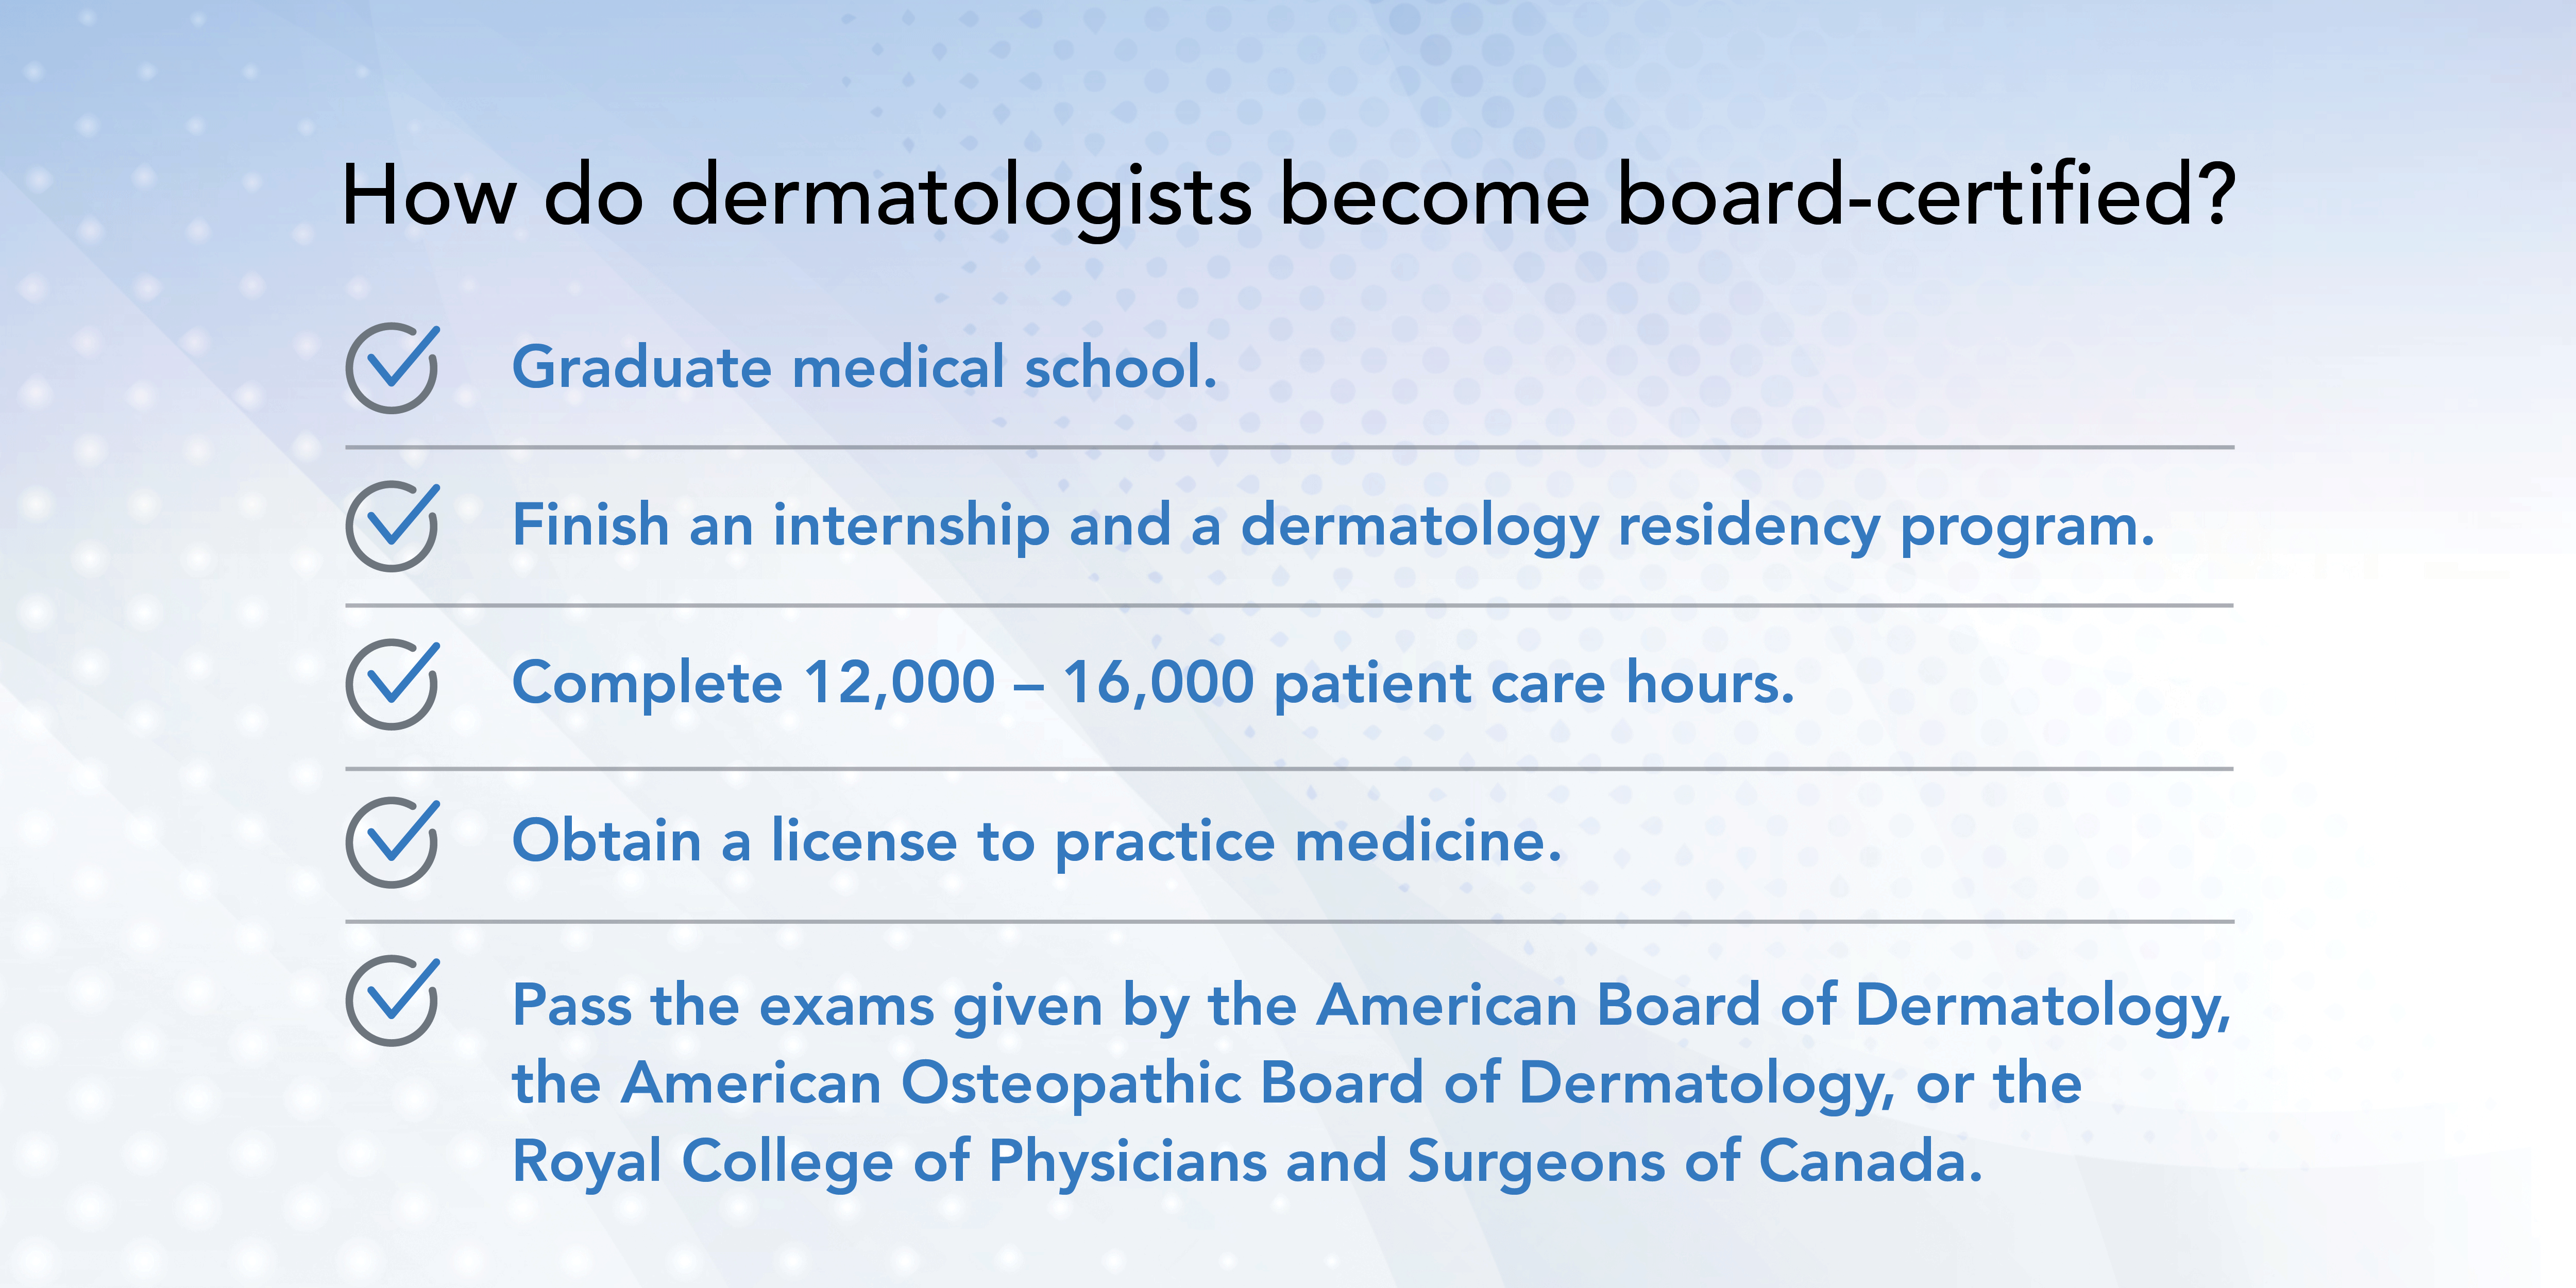 How dermatologists become board-certified infographic.